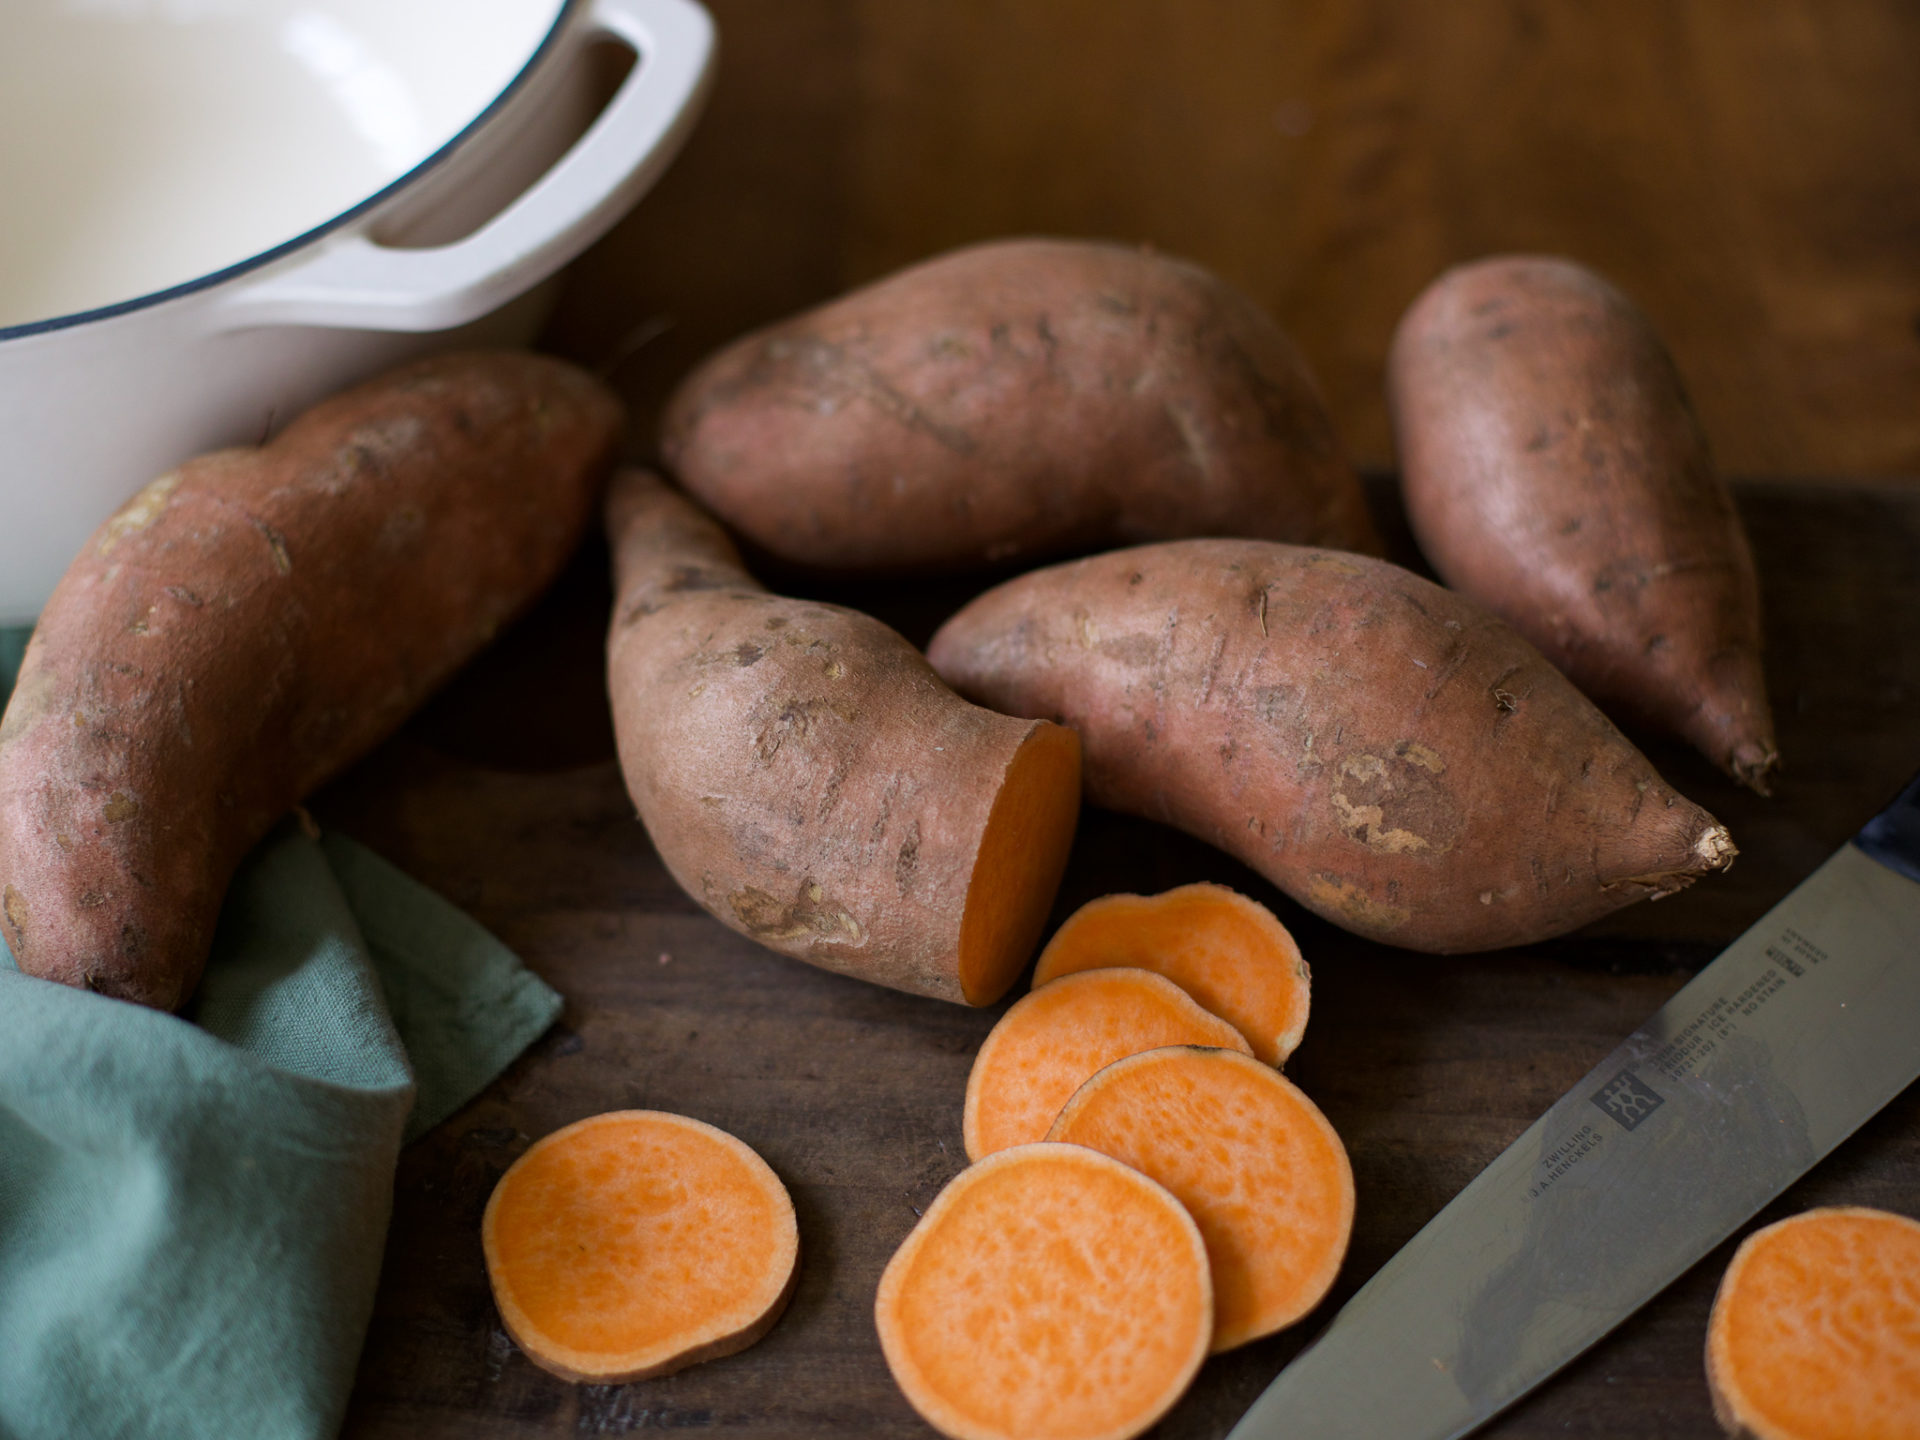 Grab Sweet Potatoes For Just 29¢ Per Pound At Kroger